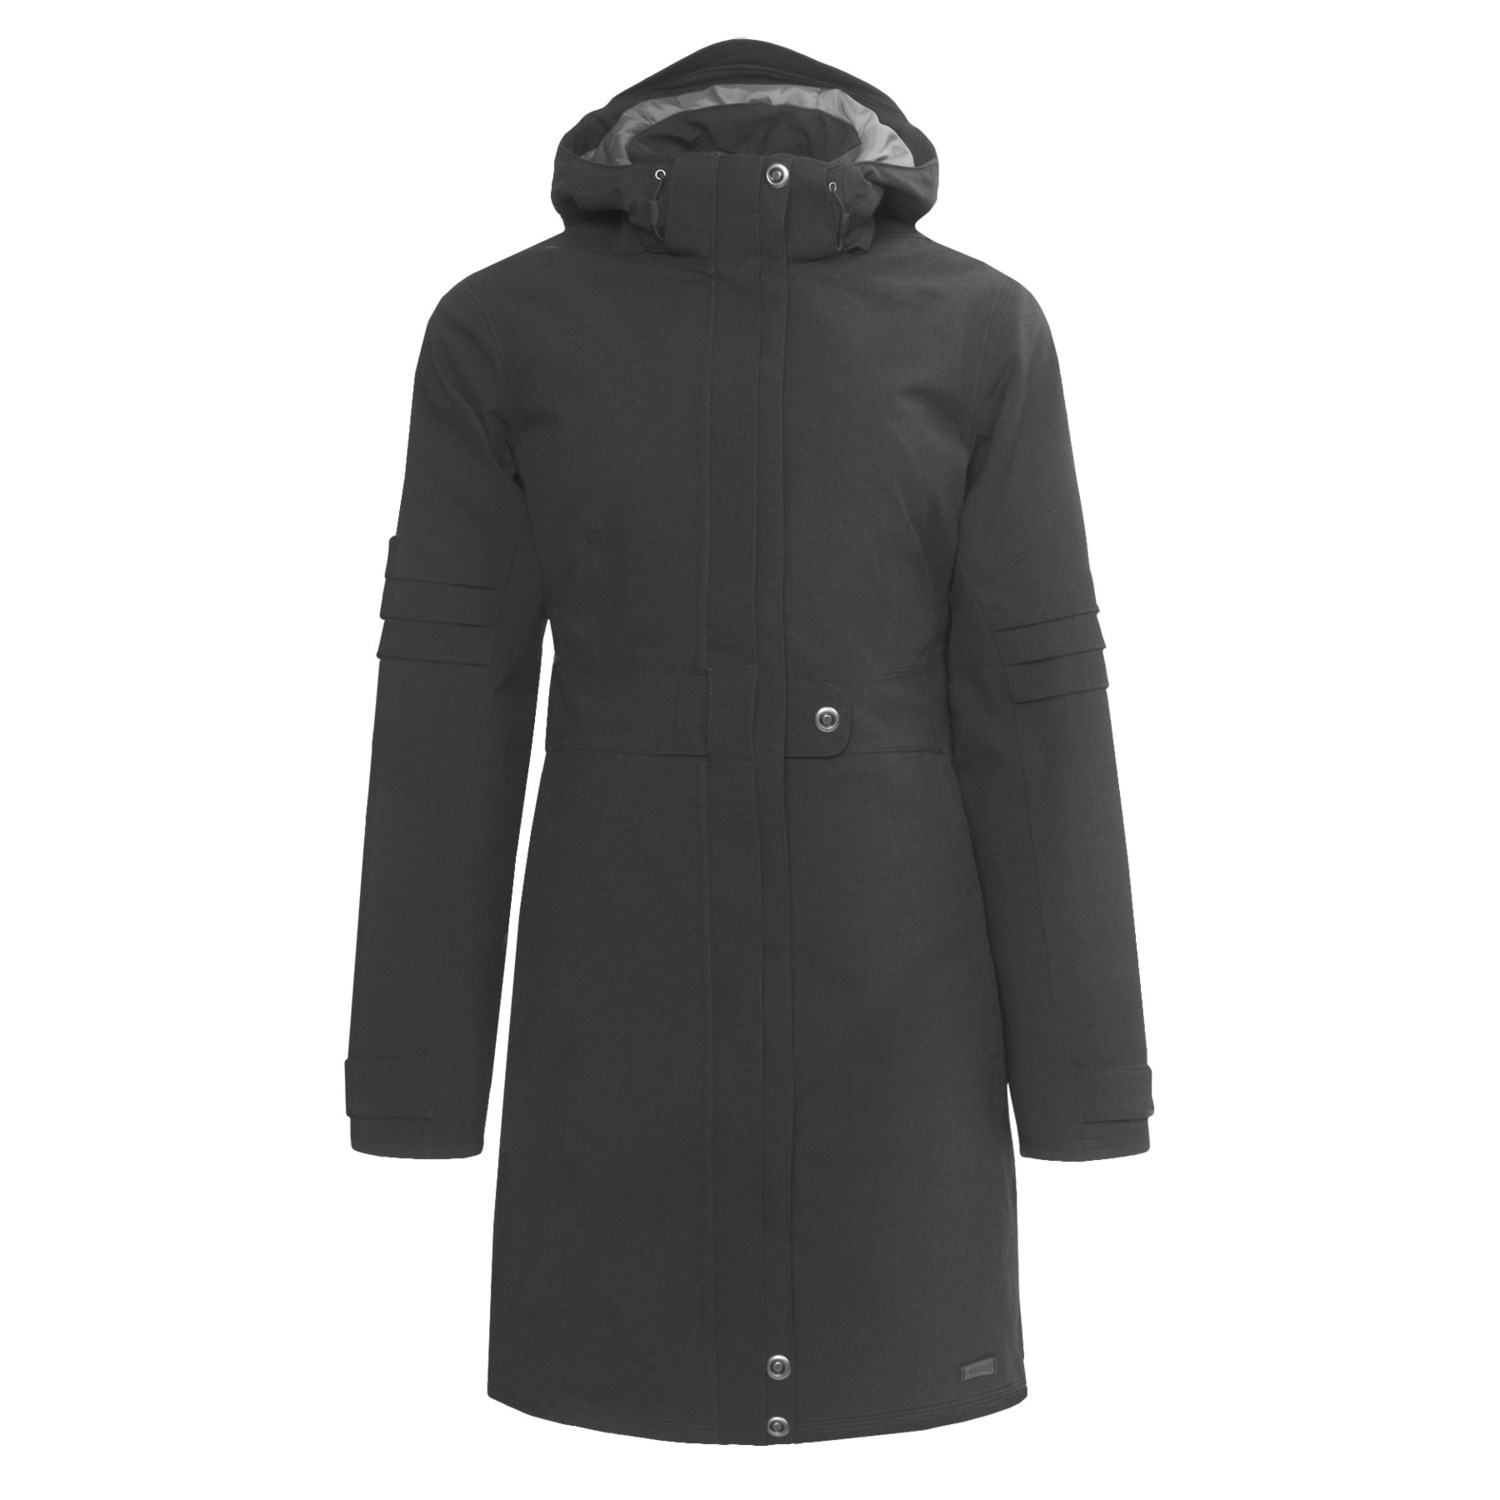 Merrell Wakefield Coat (For Women) 4462A - Save 35%